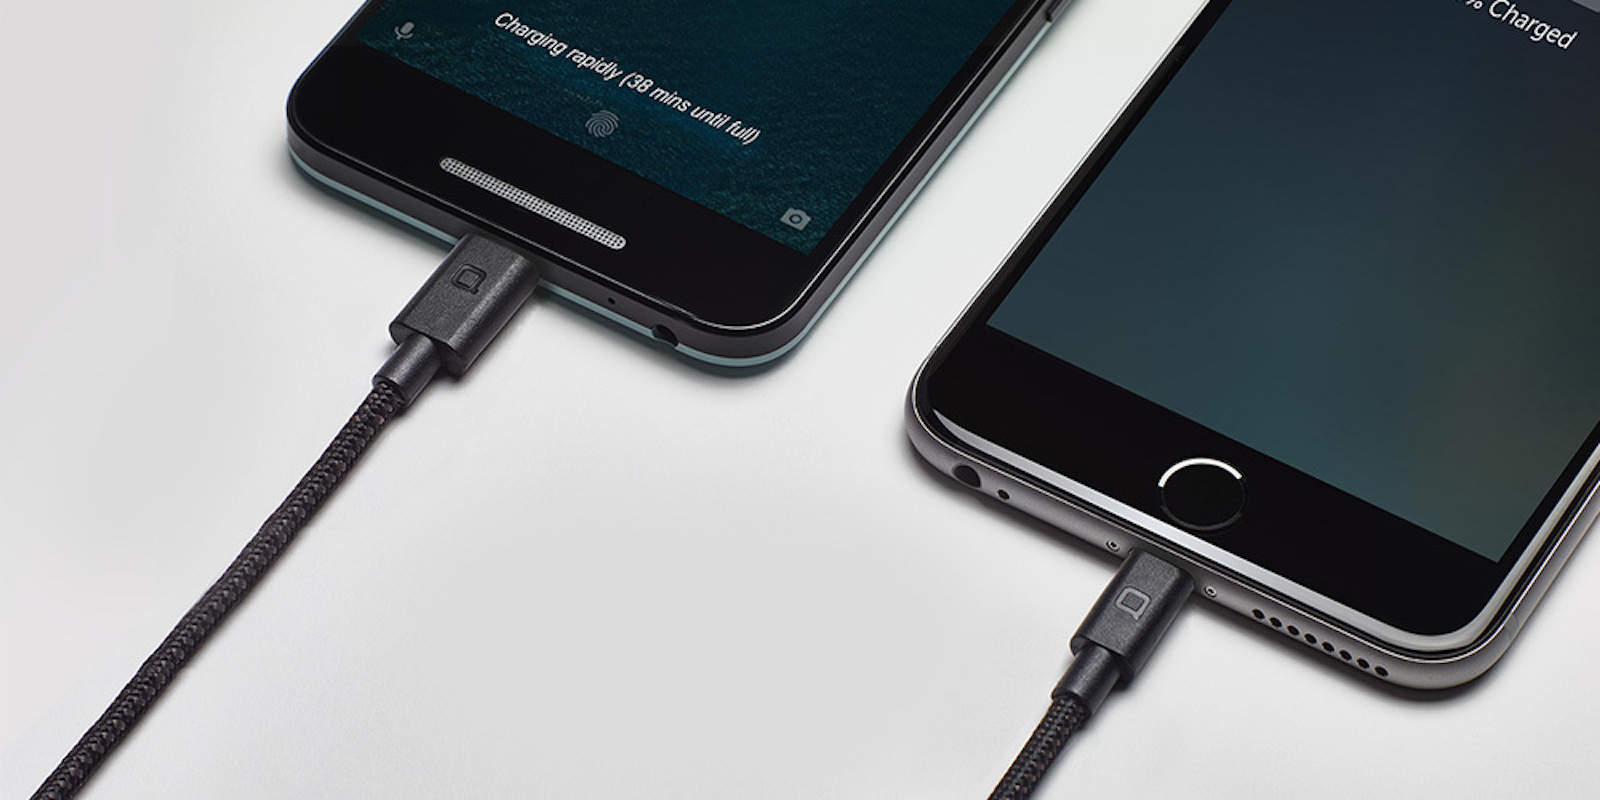 This kevlar-encased Lightning cable is built to last.